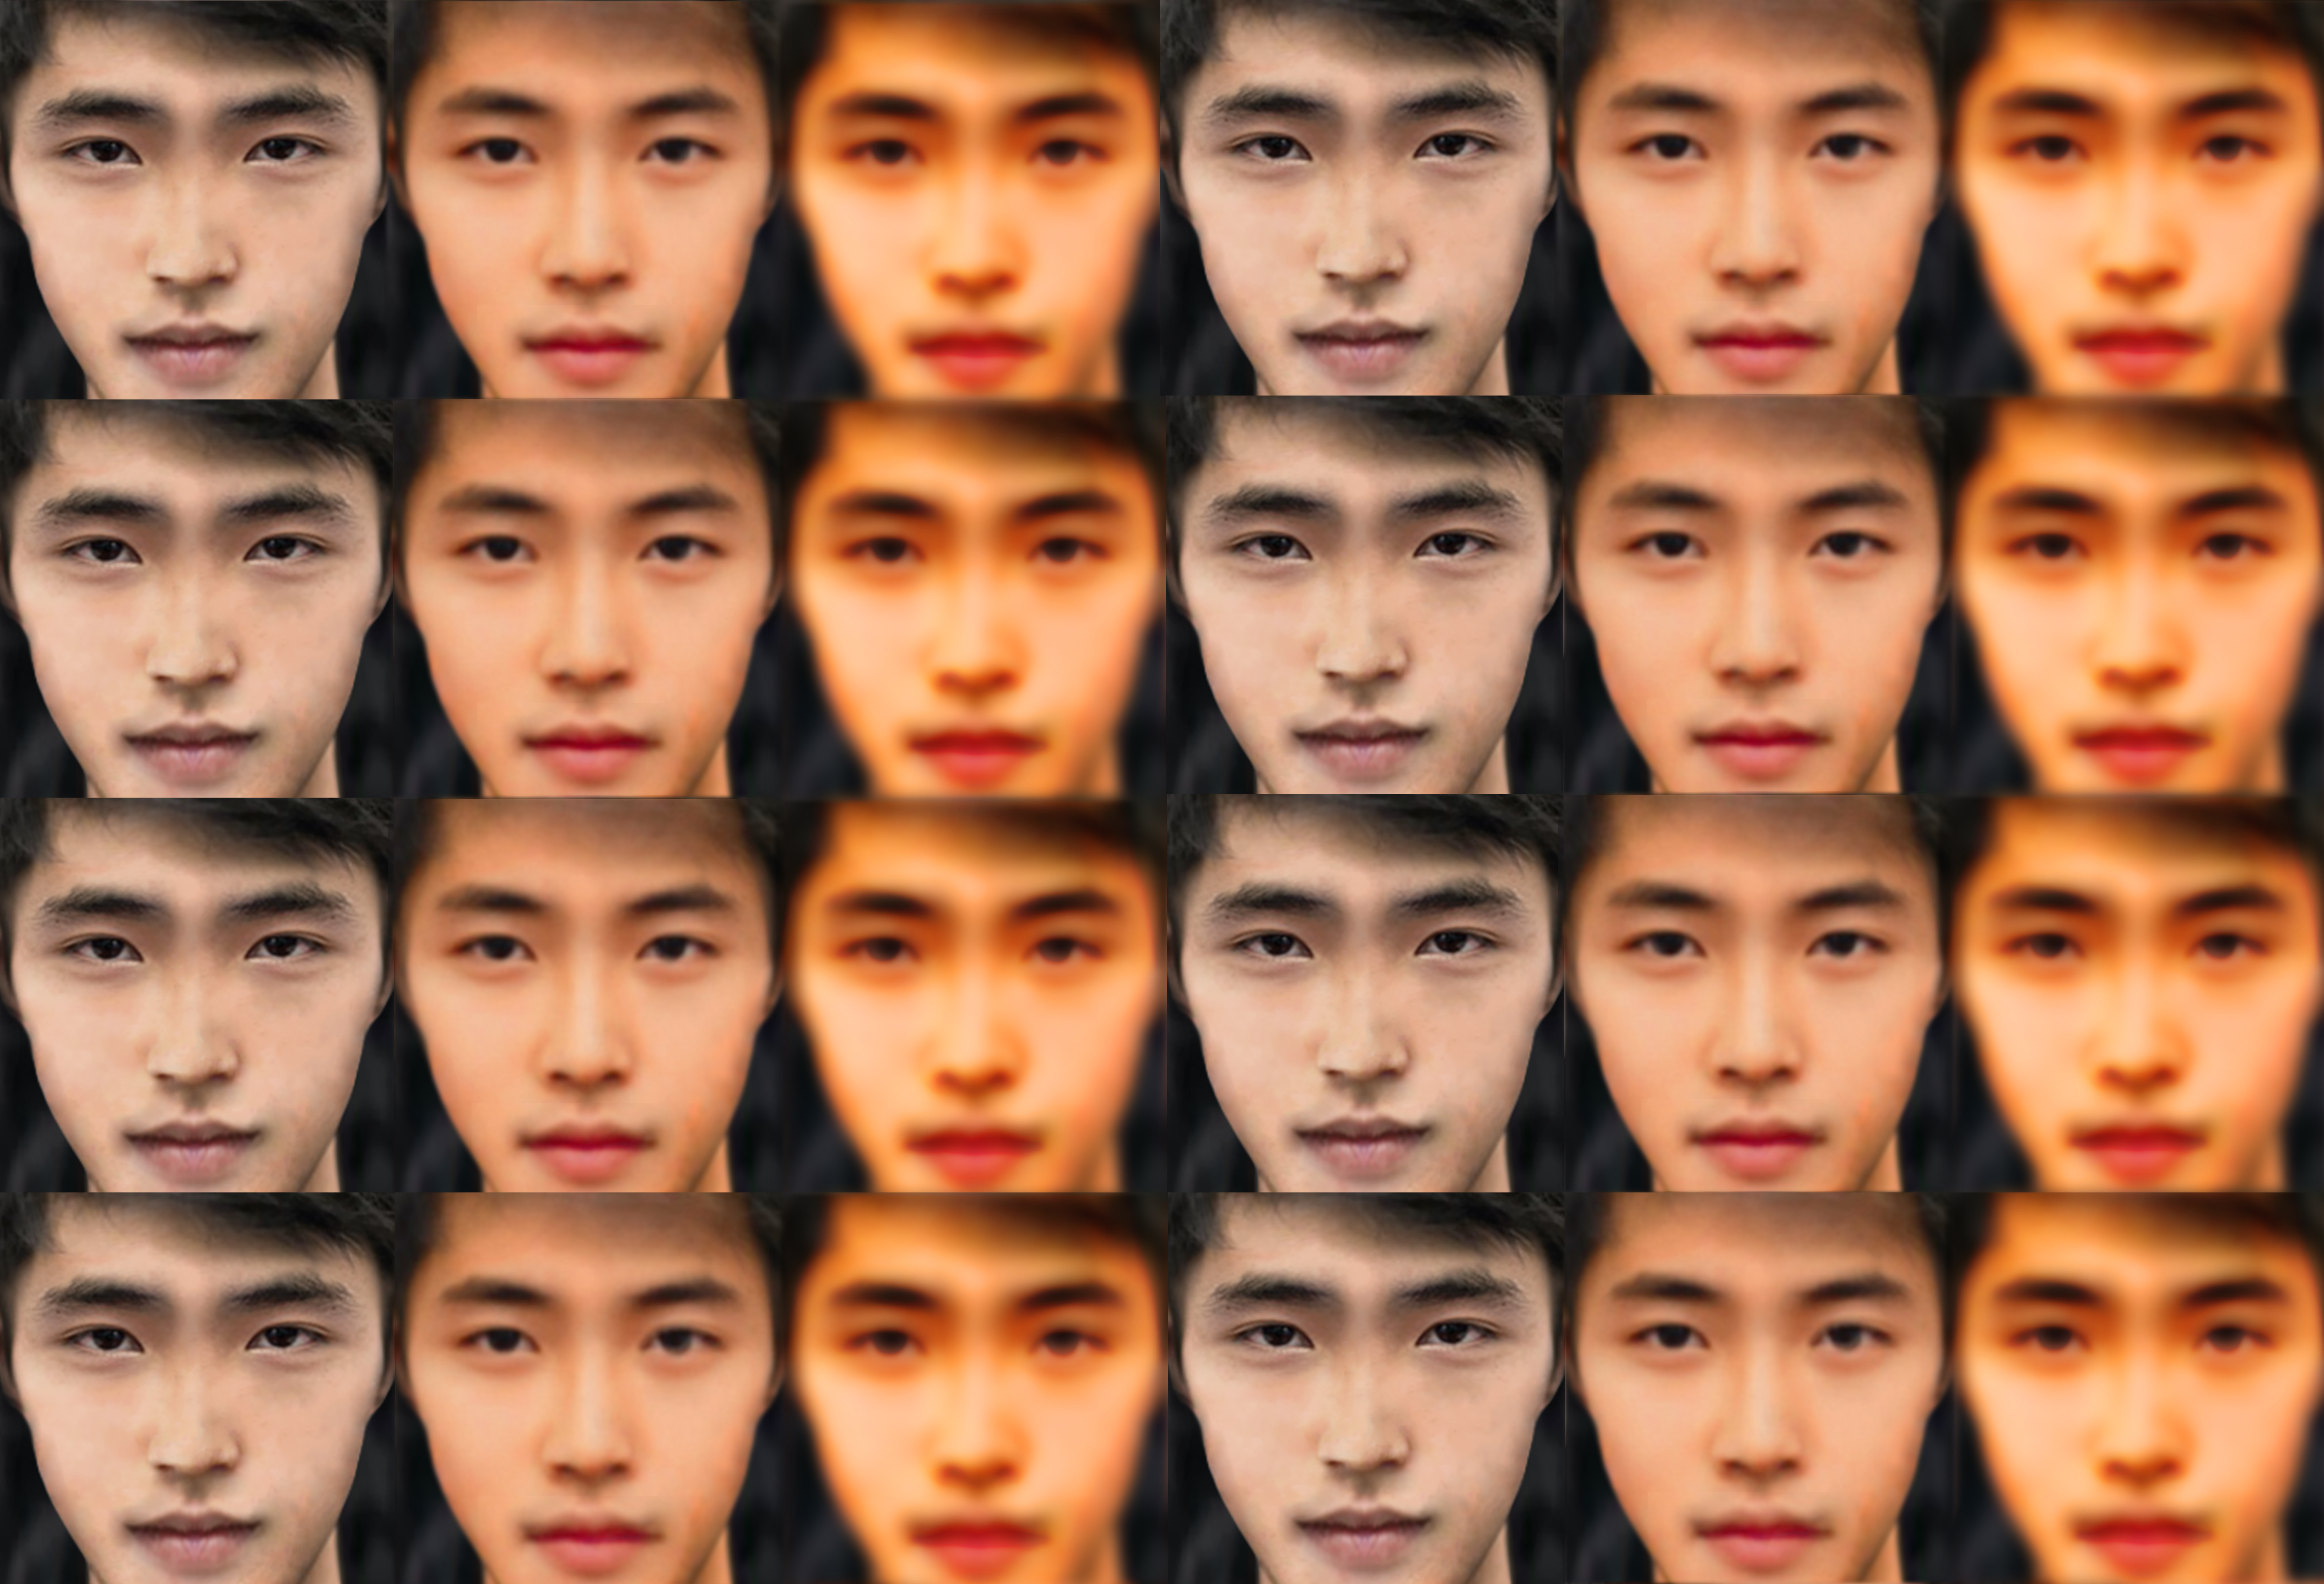 New York, NY - MARCH, 2019: Deepfake Face Manipulation of Asian Male